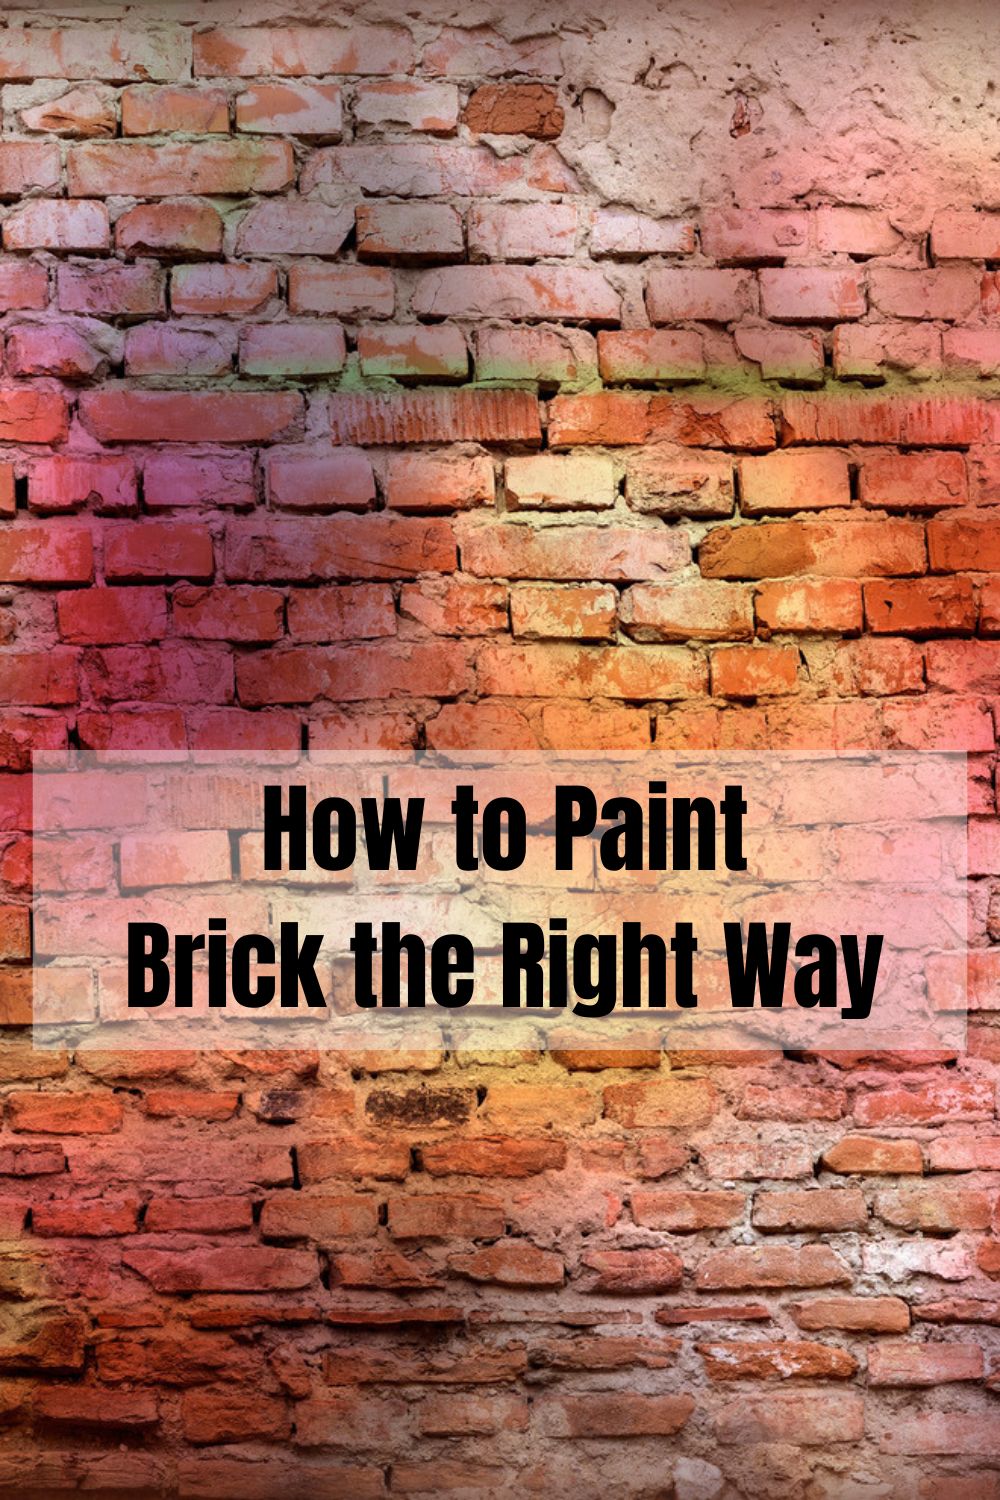 How to Paint Brick the Right Way